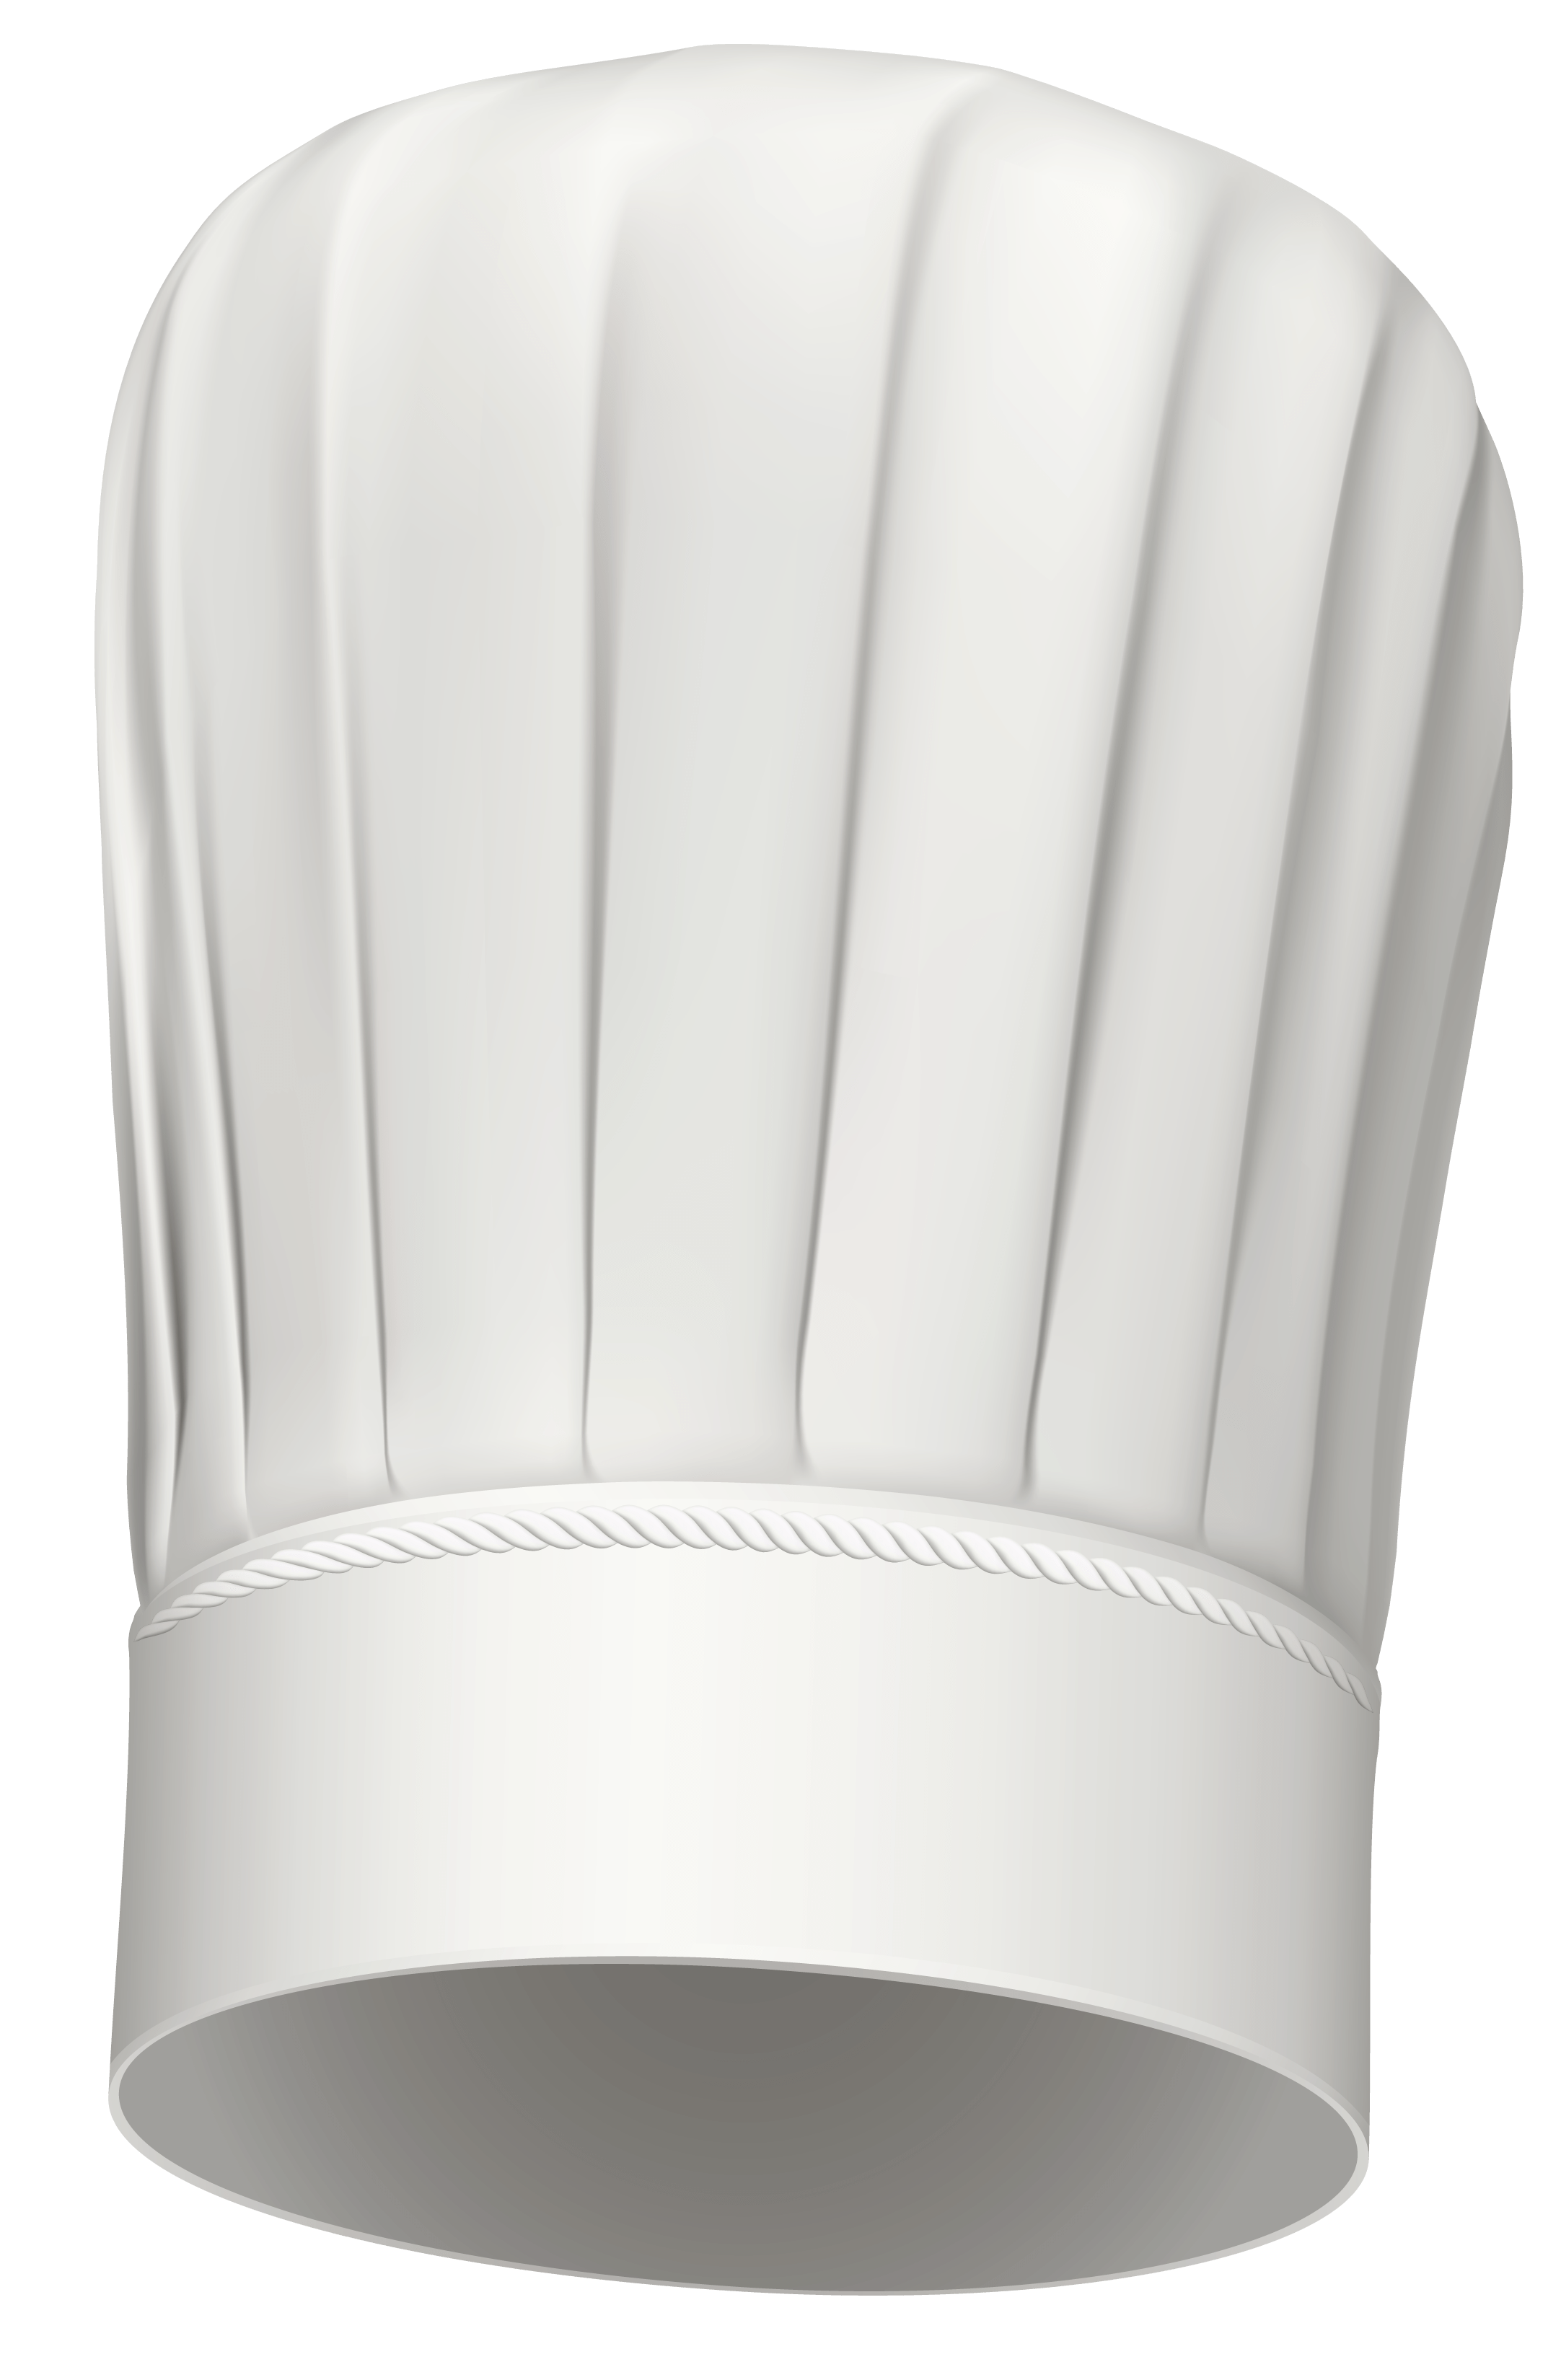 Chef Hat Free Clipart HQ PNG Image